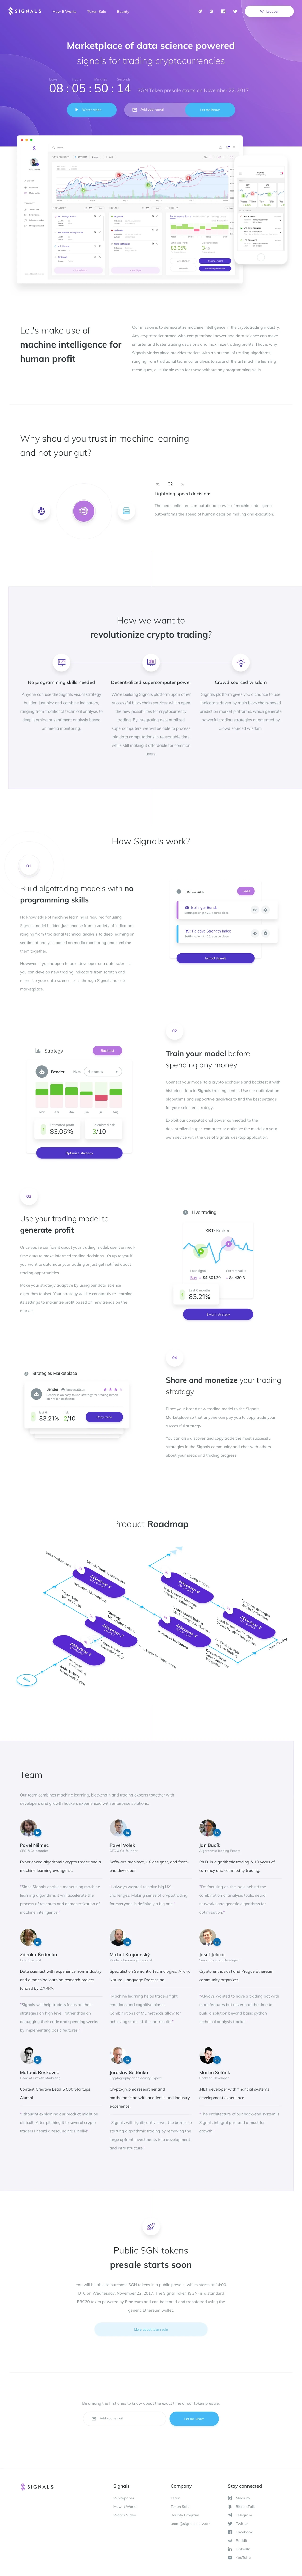 Signals Landing Page Example: Marketplace of data science powered signals for trading cryptocurrencies